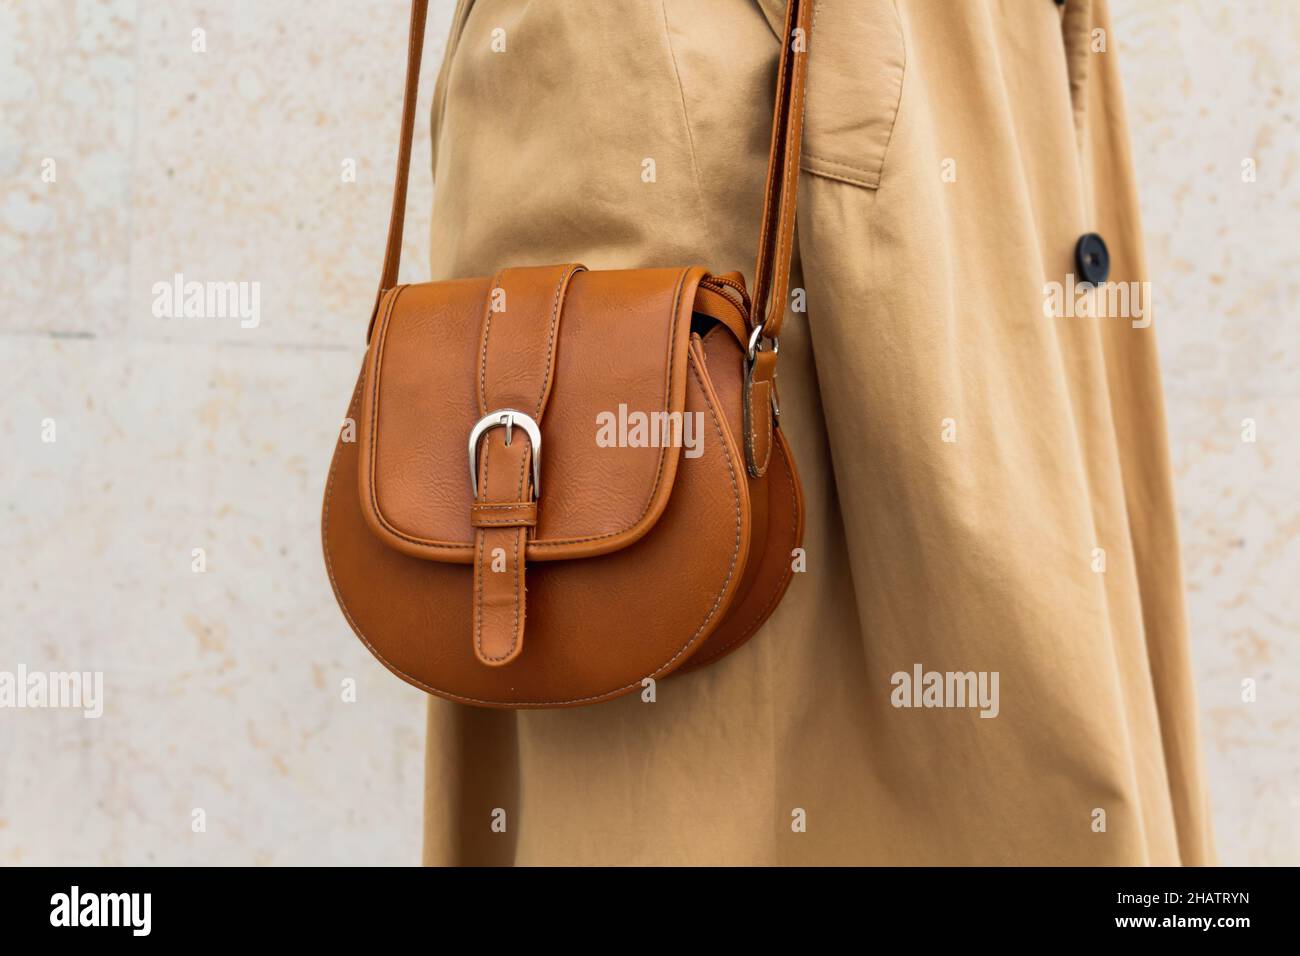 Beige small bag with long strap on woman. Stock Photo